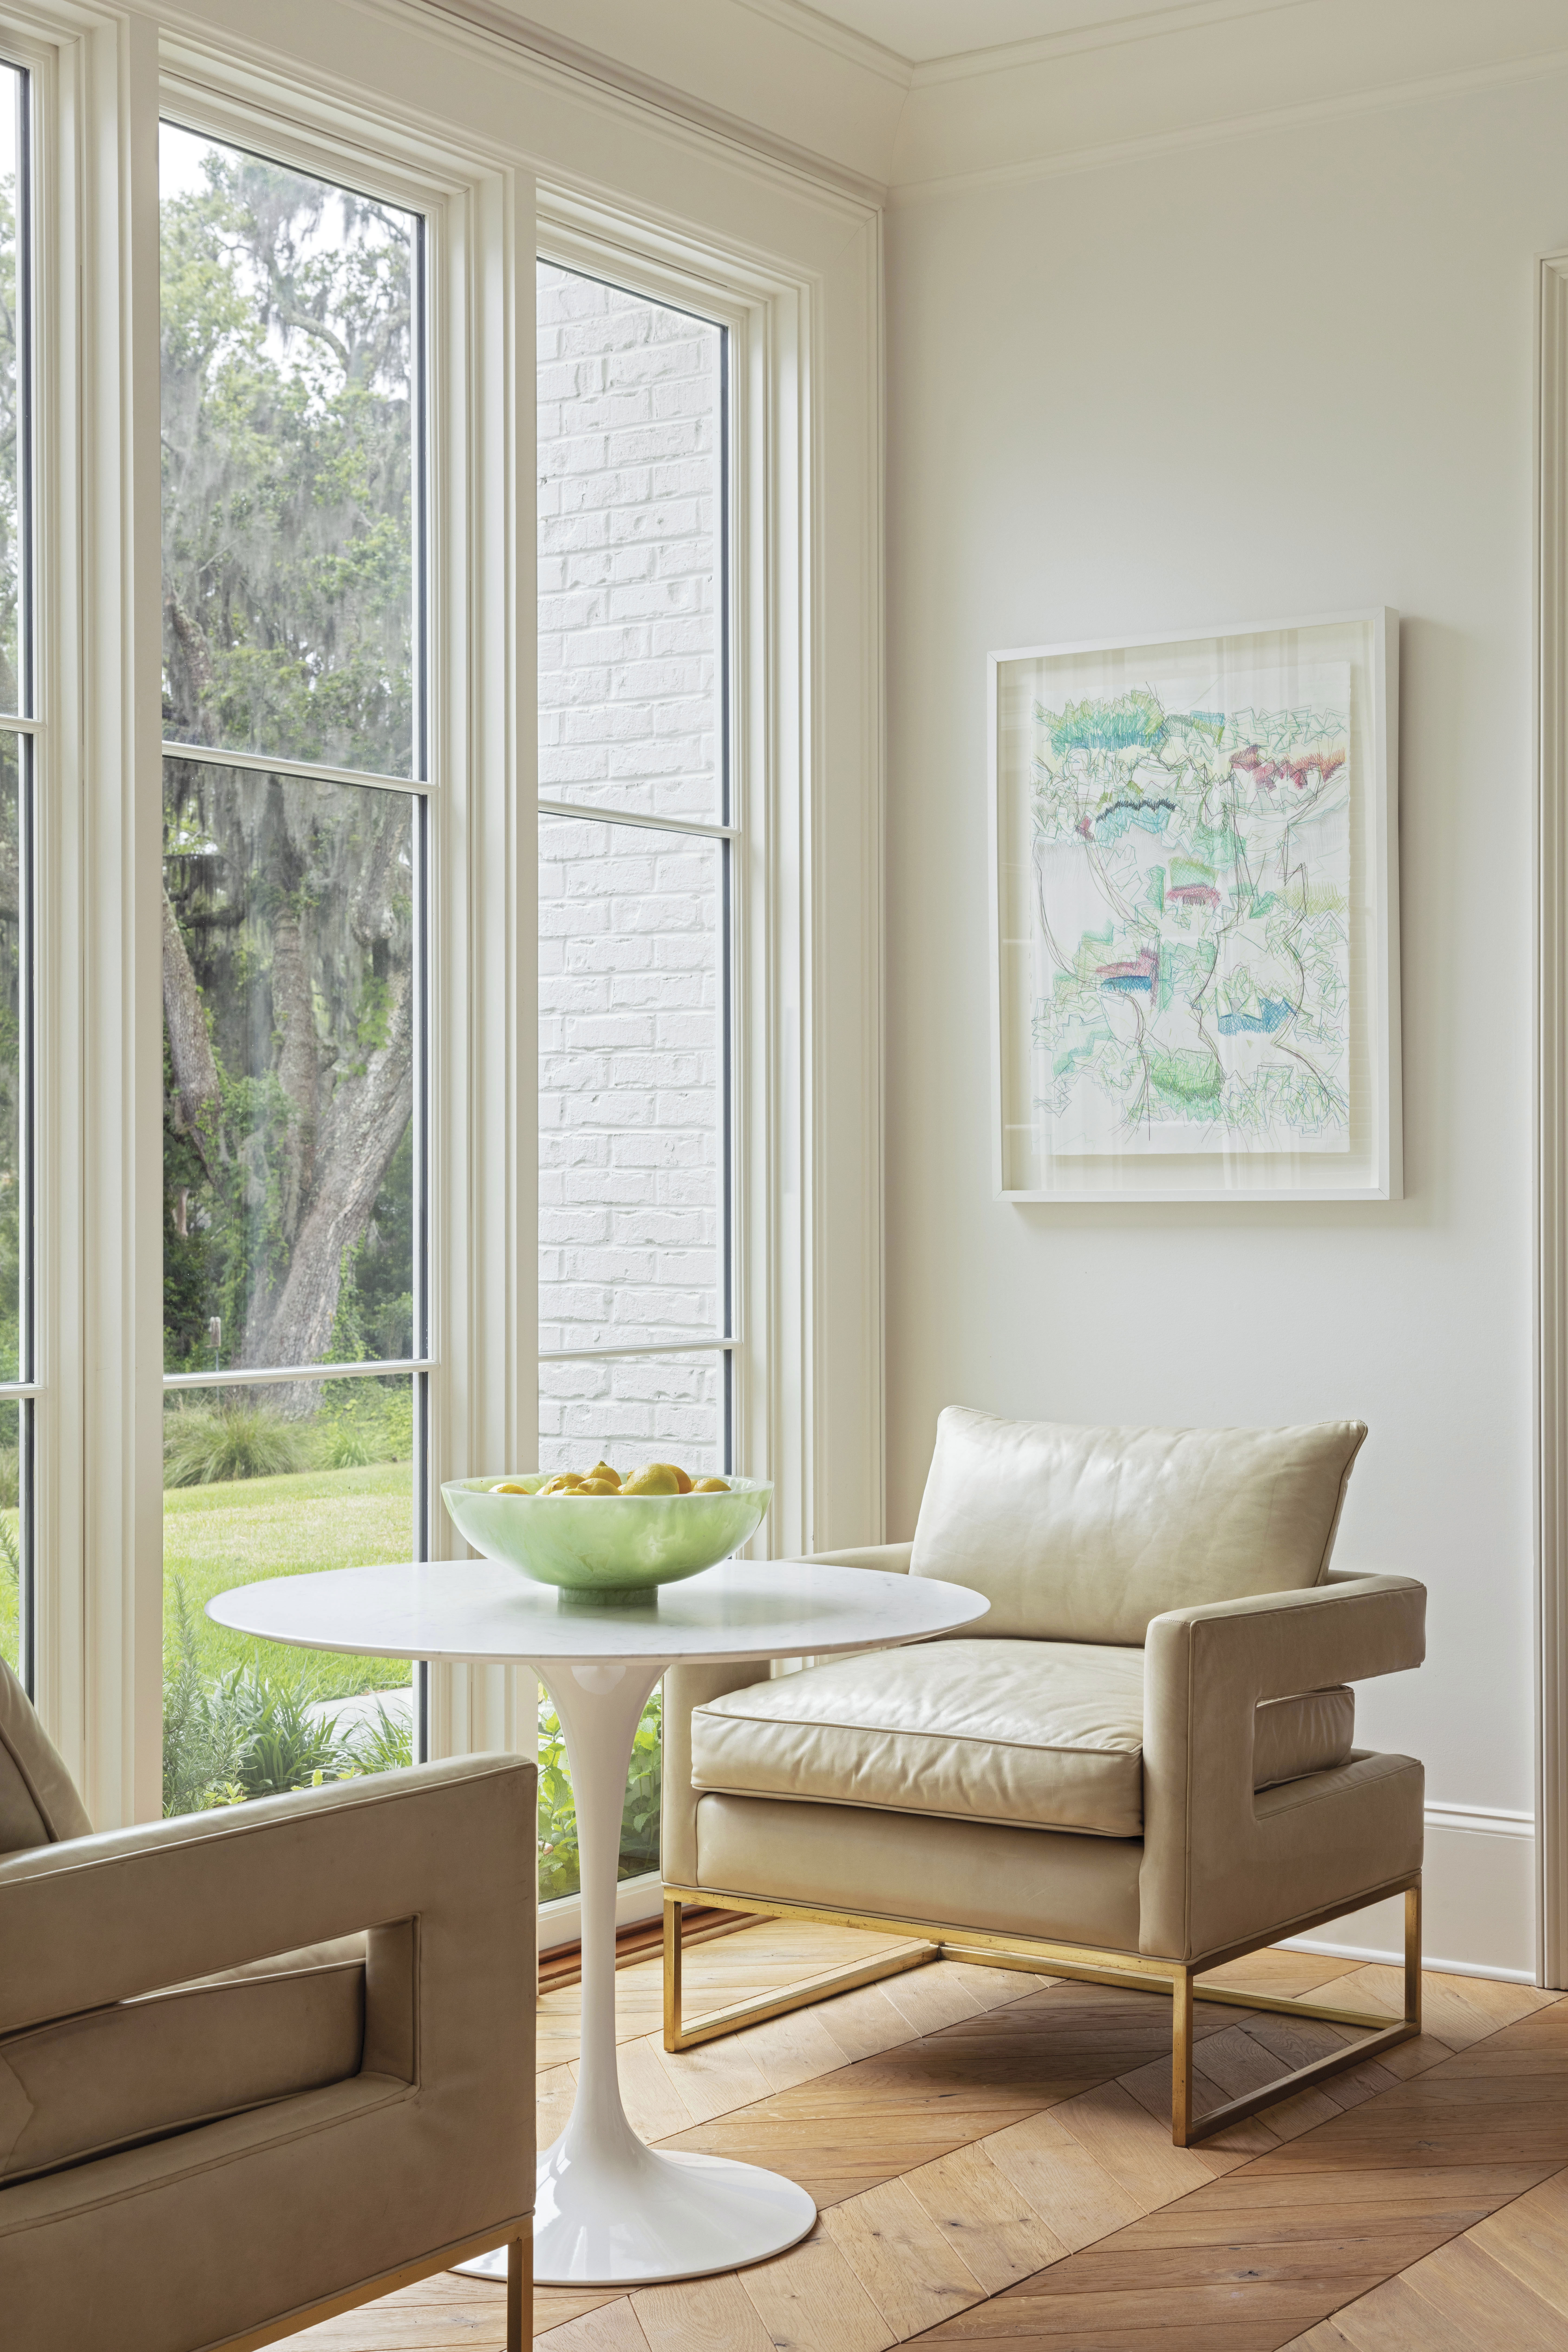 The garden room in the hyphen between the kitchen and the main home creates a nice pause, as well as a spot to soak up the view on vintage chairs paired with a Knoll “Saarinen” table.